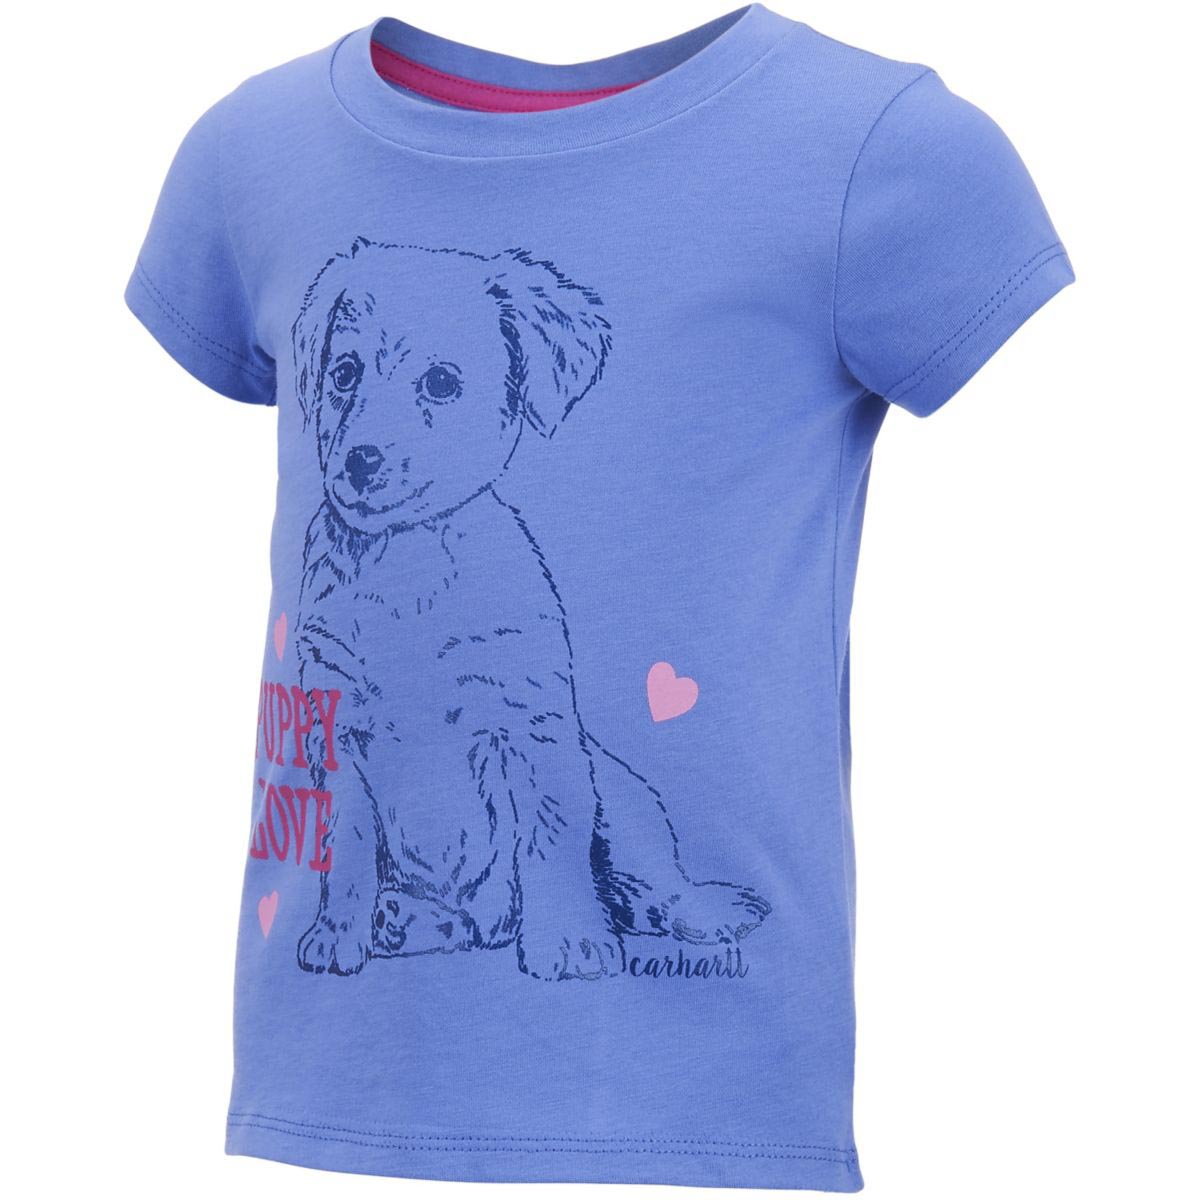 Carhartt Infant and Toddler Girls Puppy Love Tee